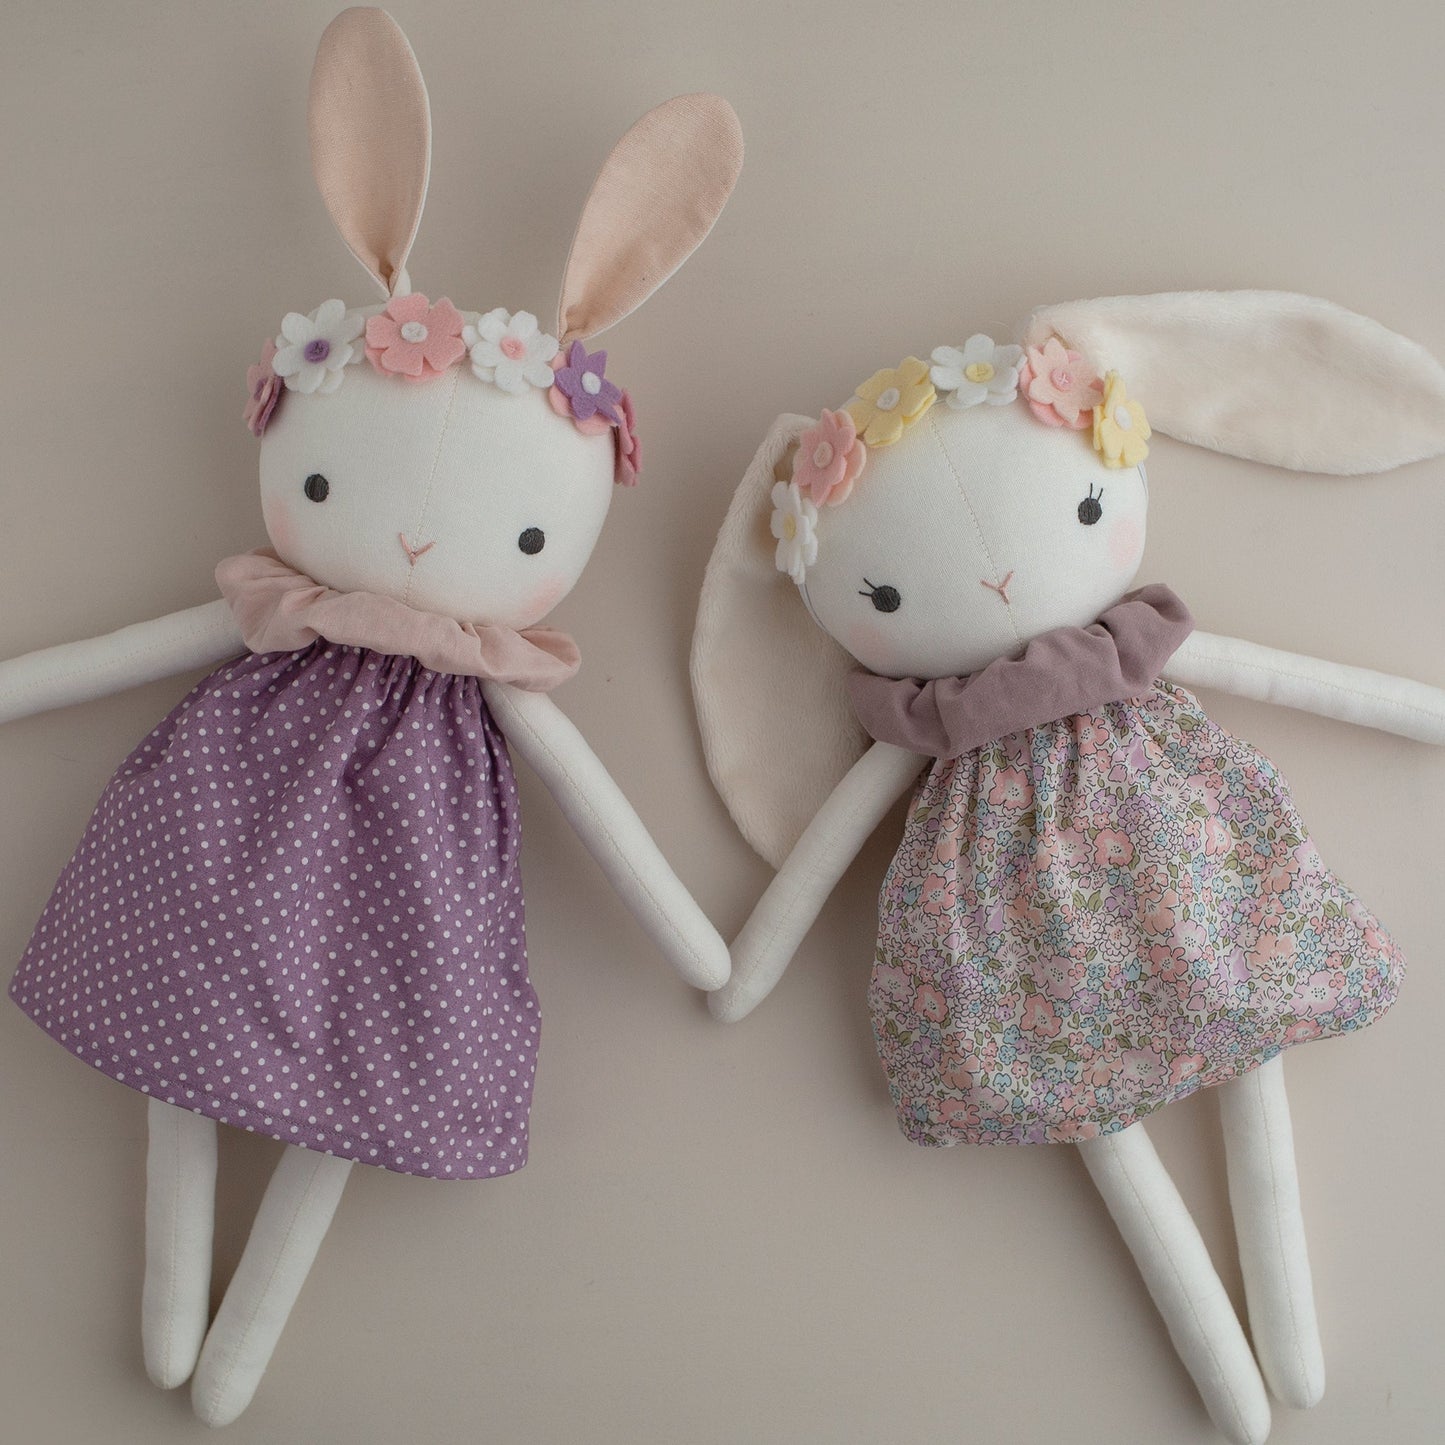 Spring outfit sewing pattern - Studio Seren